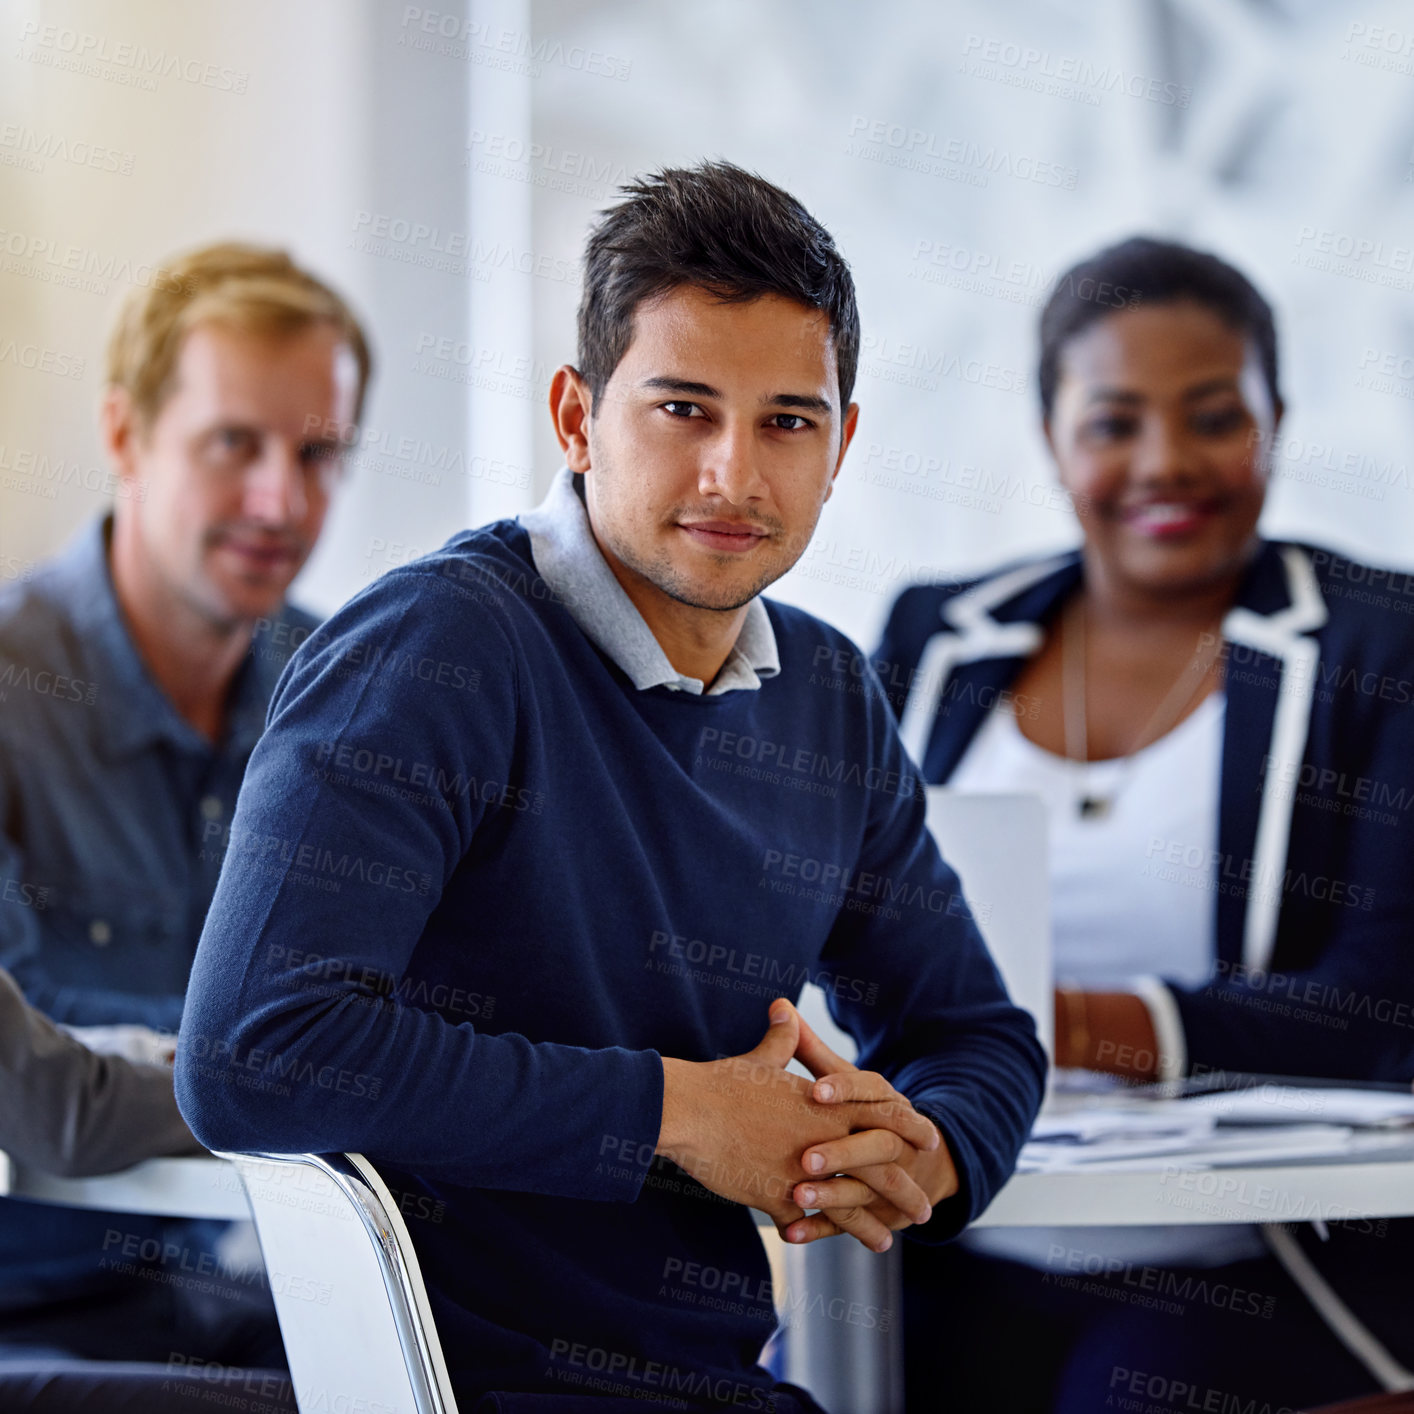 Buy stock photo Portrait of a young businessman with colleagues in the background